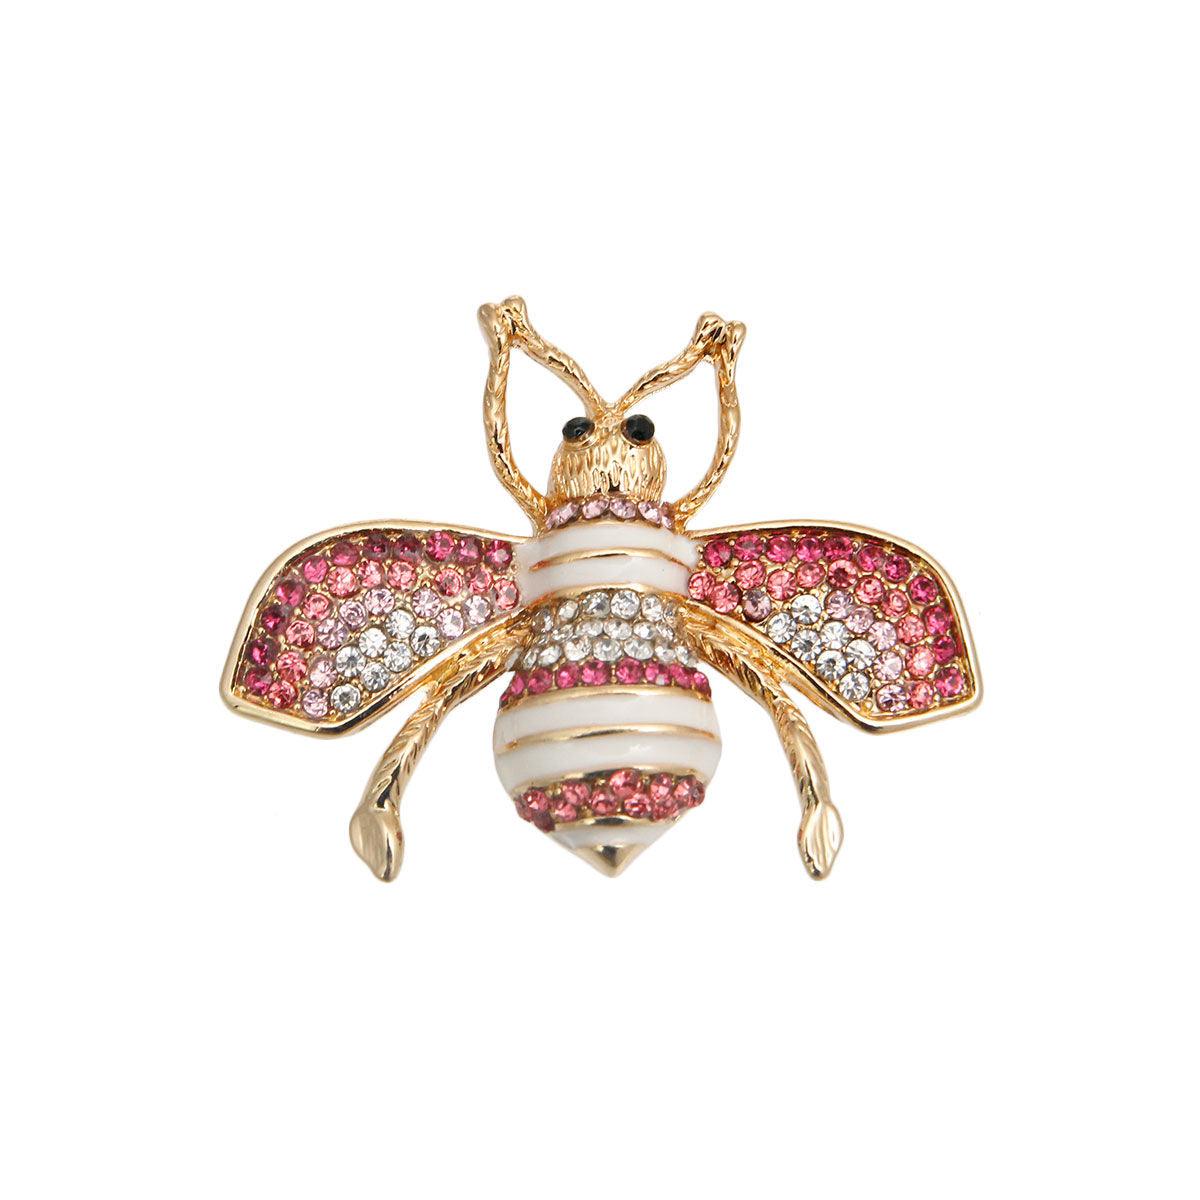 Buzz with Style: Pink Bee Brooch and Lapel Pin - The Perfect Accessory!